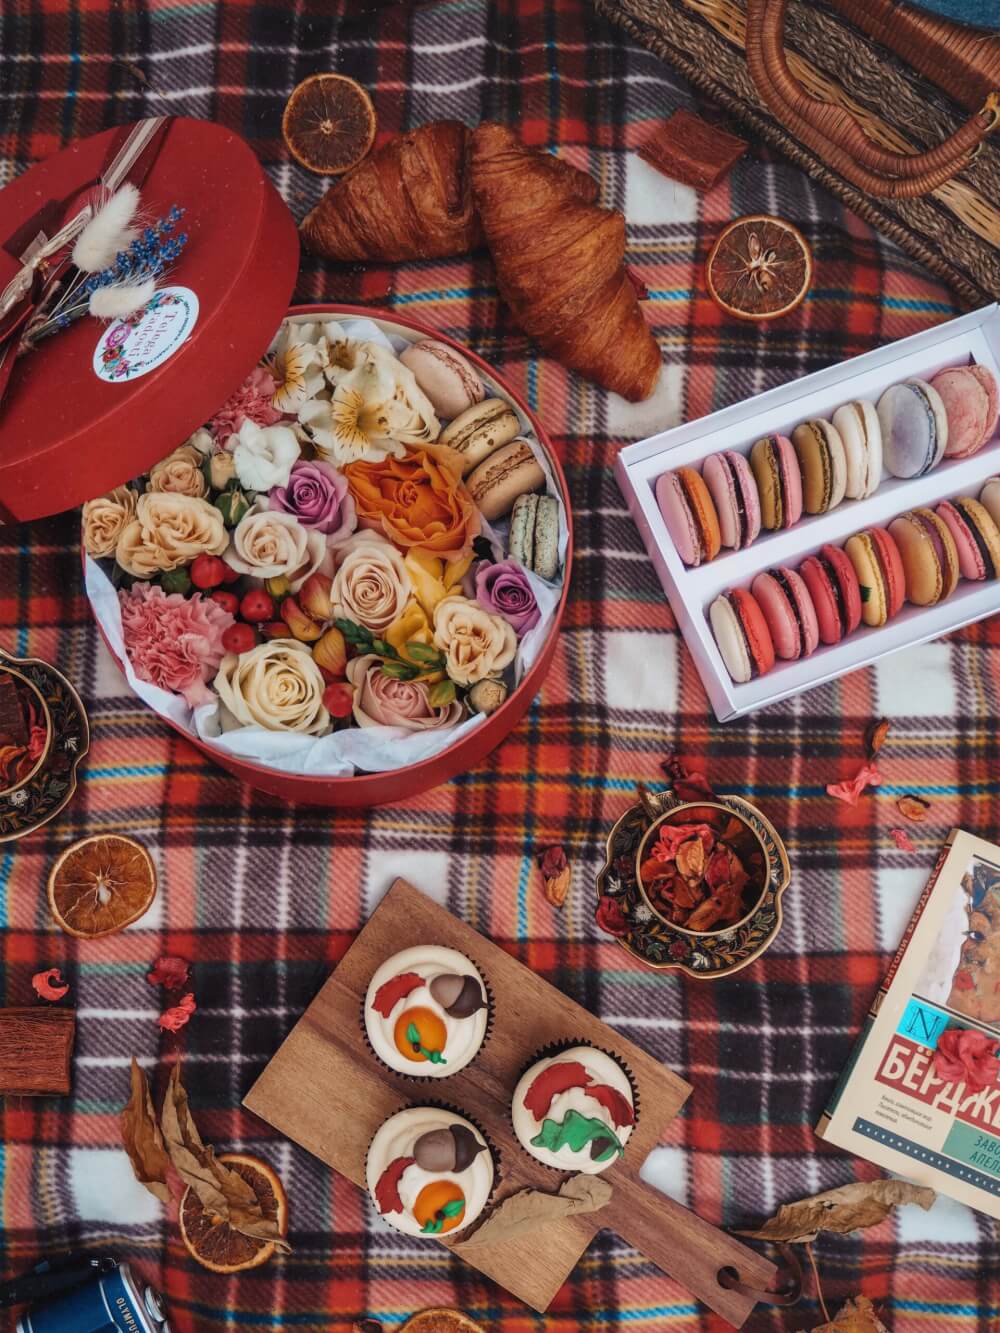 Picnic spread with cupcakes and a baguette on a checkered blanket